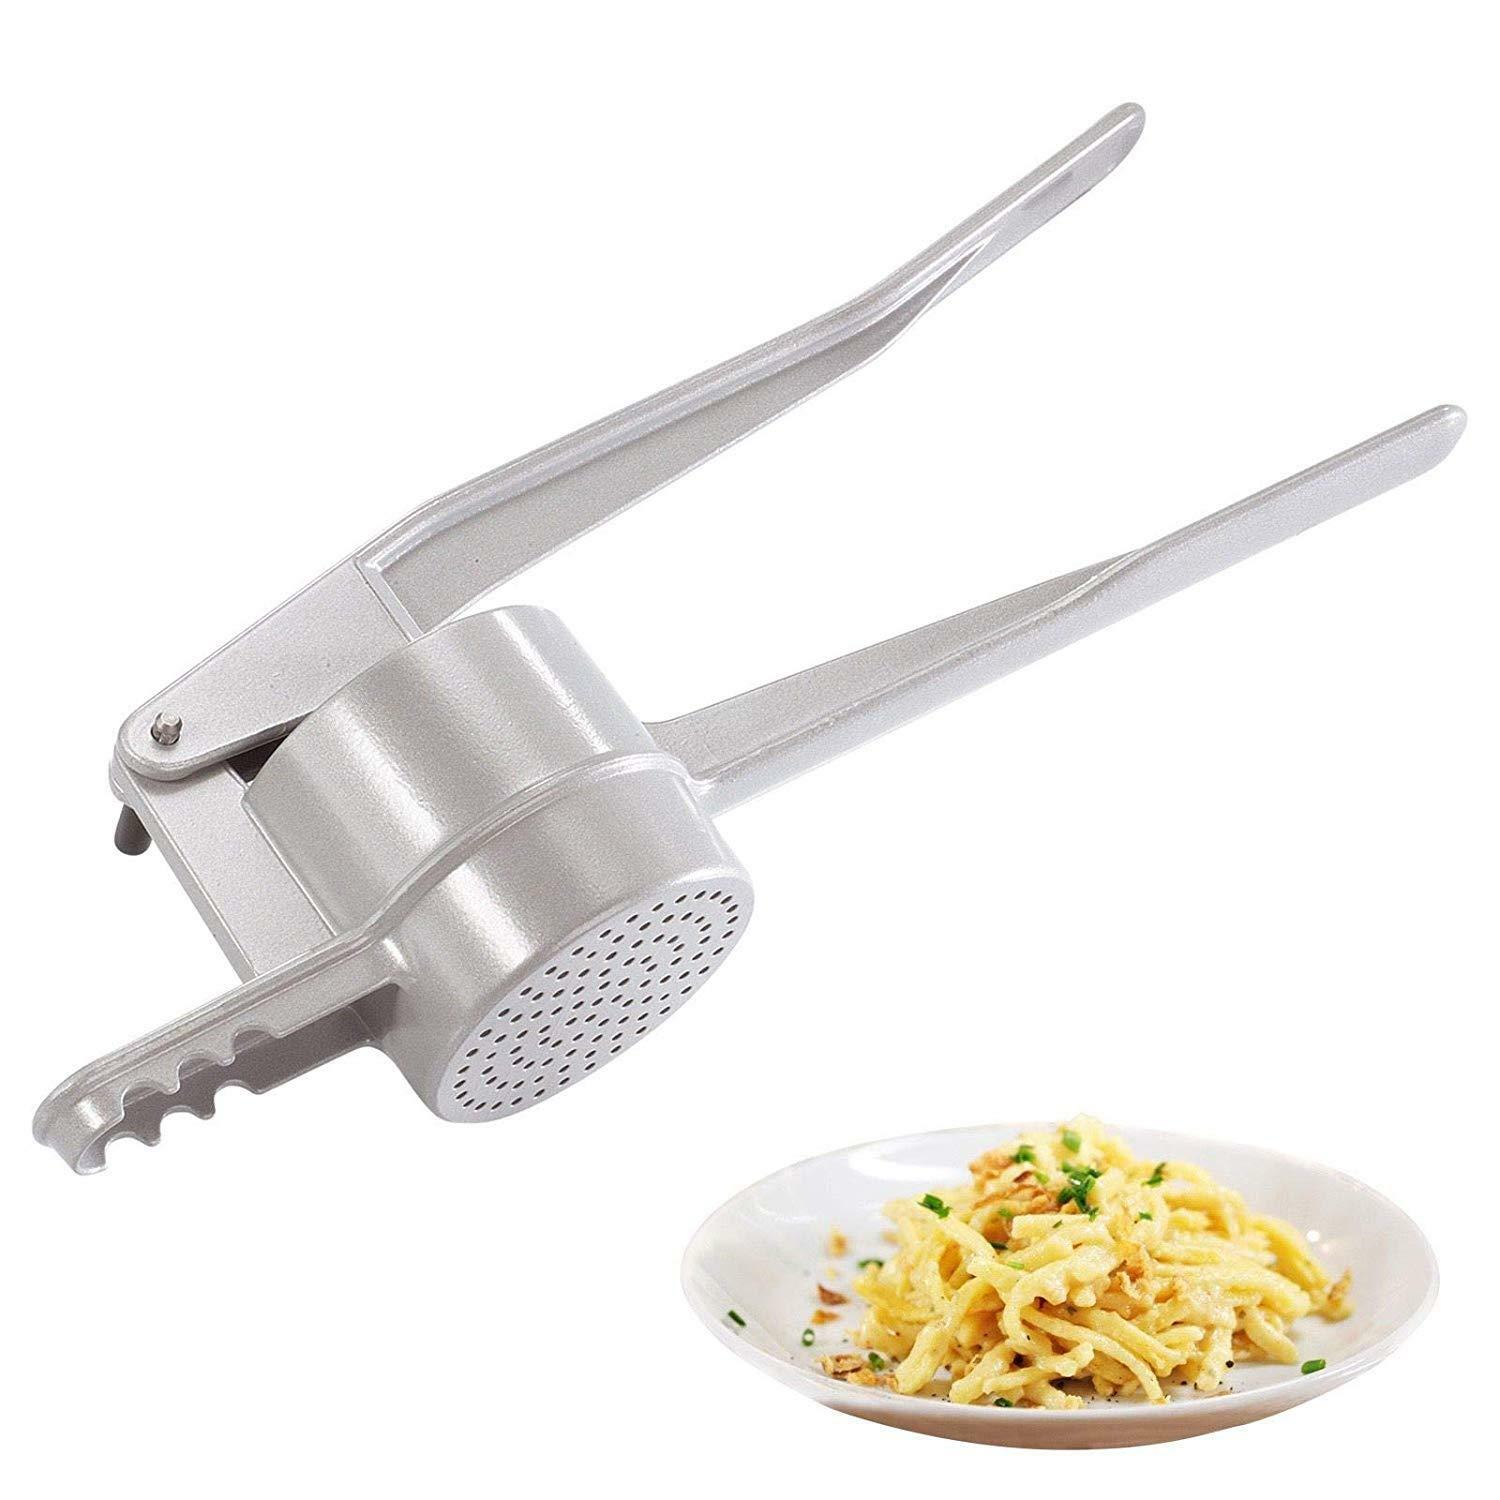 Westmark German Spaetzle Classic Round Spaghetti Noodle Maker, Silver